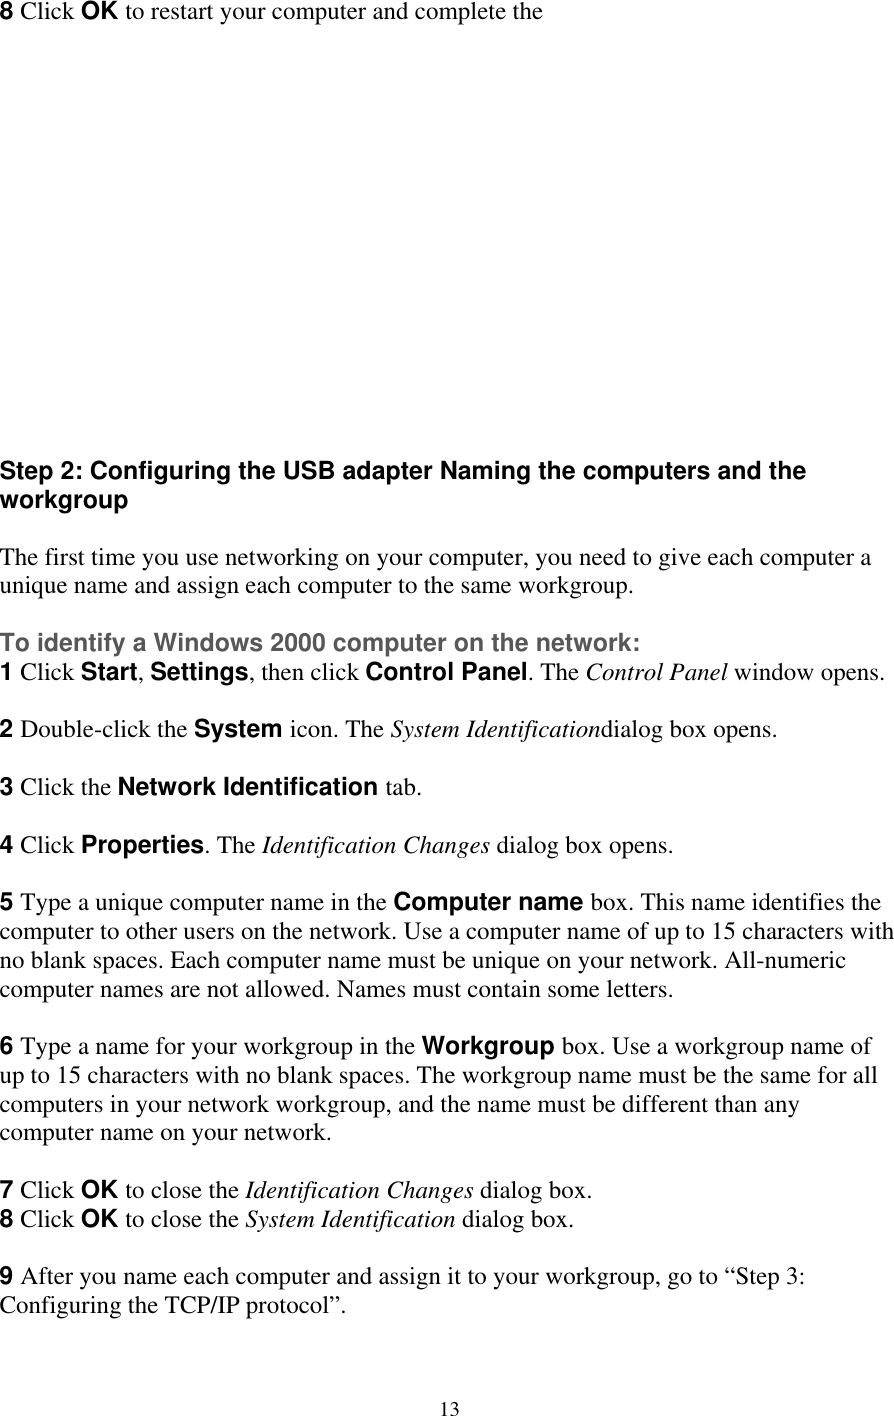 8 Click OK to restart your computer and complete the                tep 2: Configuring the USB adapter Naming the computers and the he first time you use networking on your computer, you need to give each computer a p.  window opens. ox opens.  box opens.   Type a unique computer name in the Computer name box. This name identifies the omputer to other users on the network. Use a computer name of up to 15 characters with o blank spaces. Each computer name must be unique on your network. All-numeric omputer names are not allowed. Names must contain some letters.  Type a name for your workgroup in the Workgroup box. Use a workgroup name of p to 15 characters with no blank spaces. The workgroup name must be the same for all omputers in your network workgroup, and the name must be different than any omputer name on your network.  Click OK to close the Identification Changes dialog box.  Click OK to close the System Identification dialog box.  After you name each computer and assign it to your workgroup, go to “Step 3: Sworkgroup  Tunique name and assign each computer to the same workgrou To identify a Windows 2000 computer on the network: 1 Click Start, Settings, then click Control Panel. The Control Panel 2 Double-click the System icon. The System Identificationdialog b 3 Click the Network Identification tab.  4 Click Properties. The Identification Changes dialog5cnc 6ucc 78 9Configuring the TCP/IP protocol”.  13